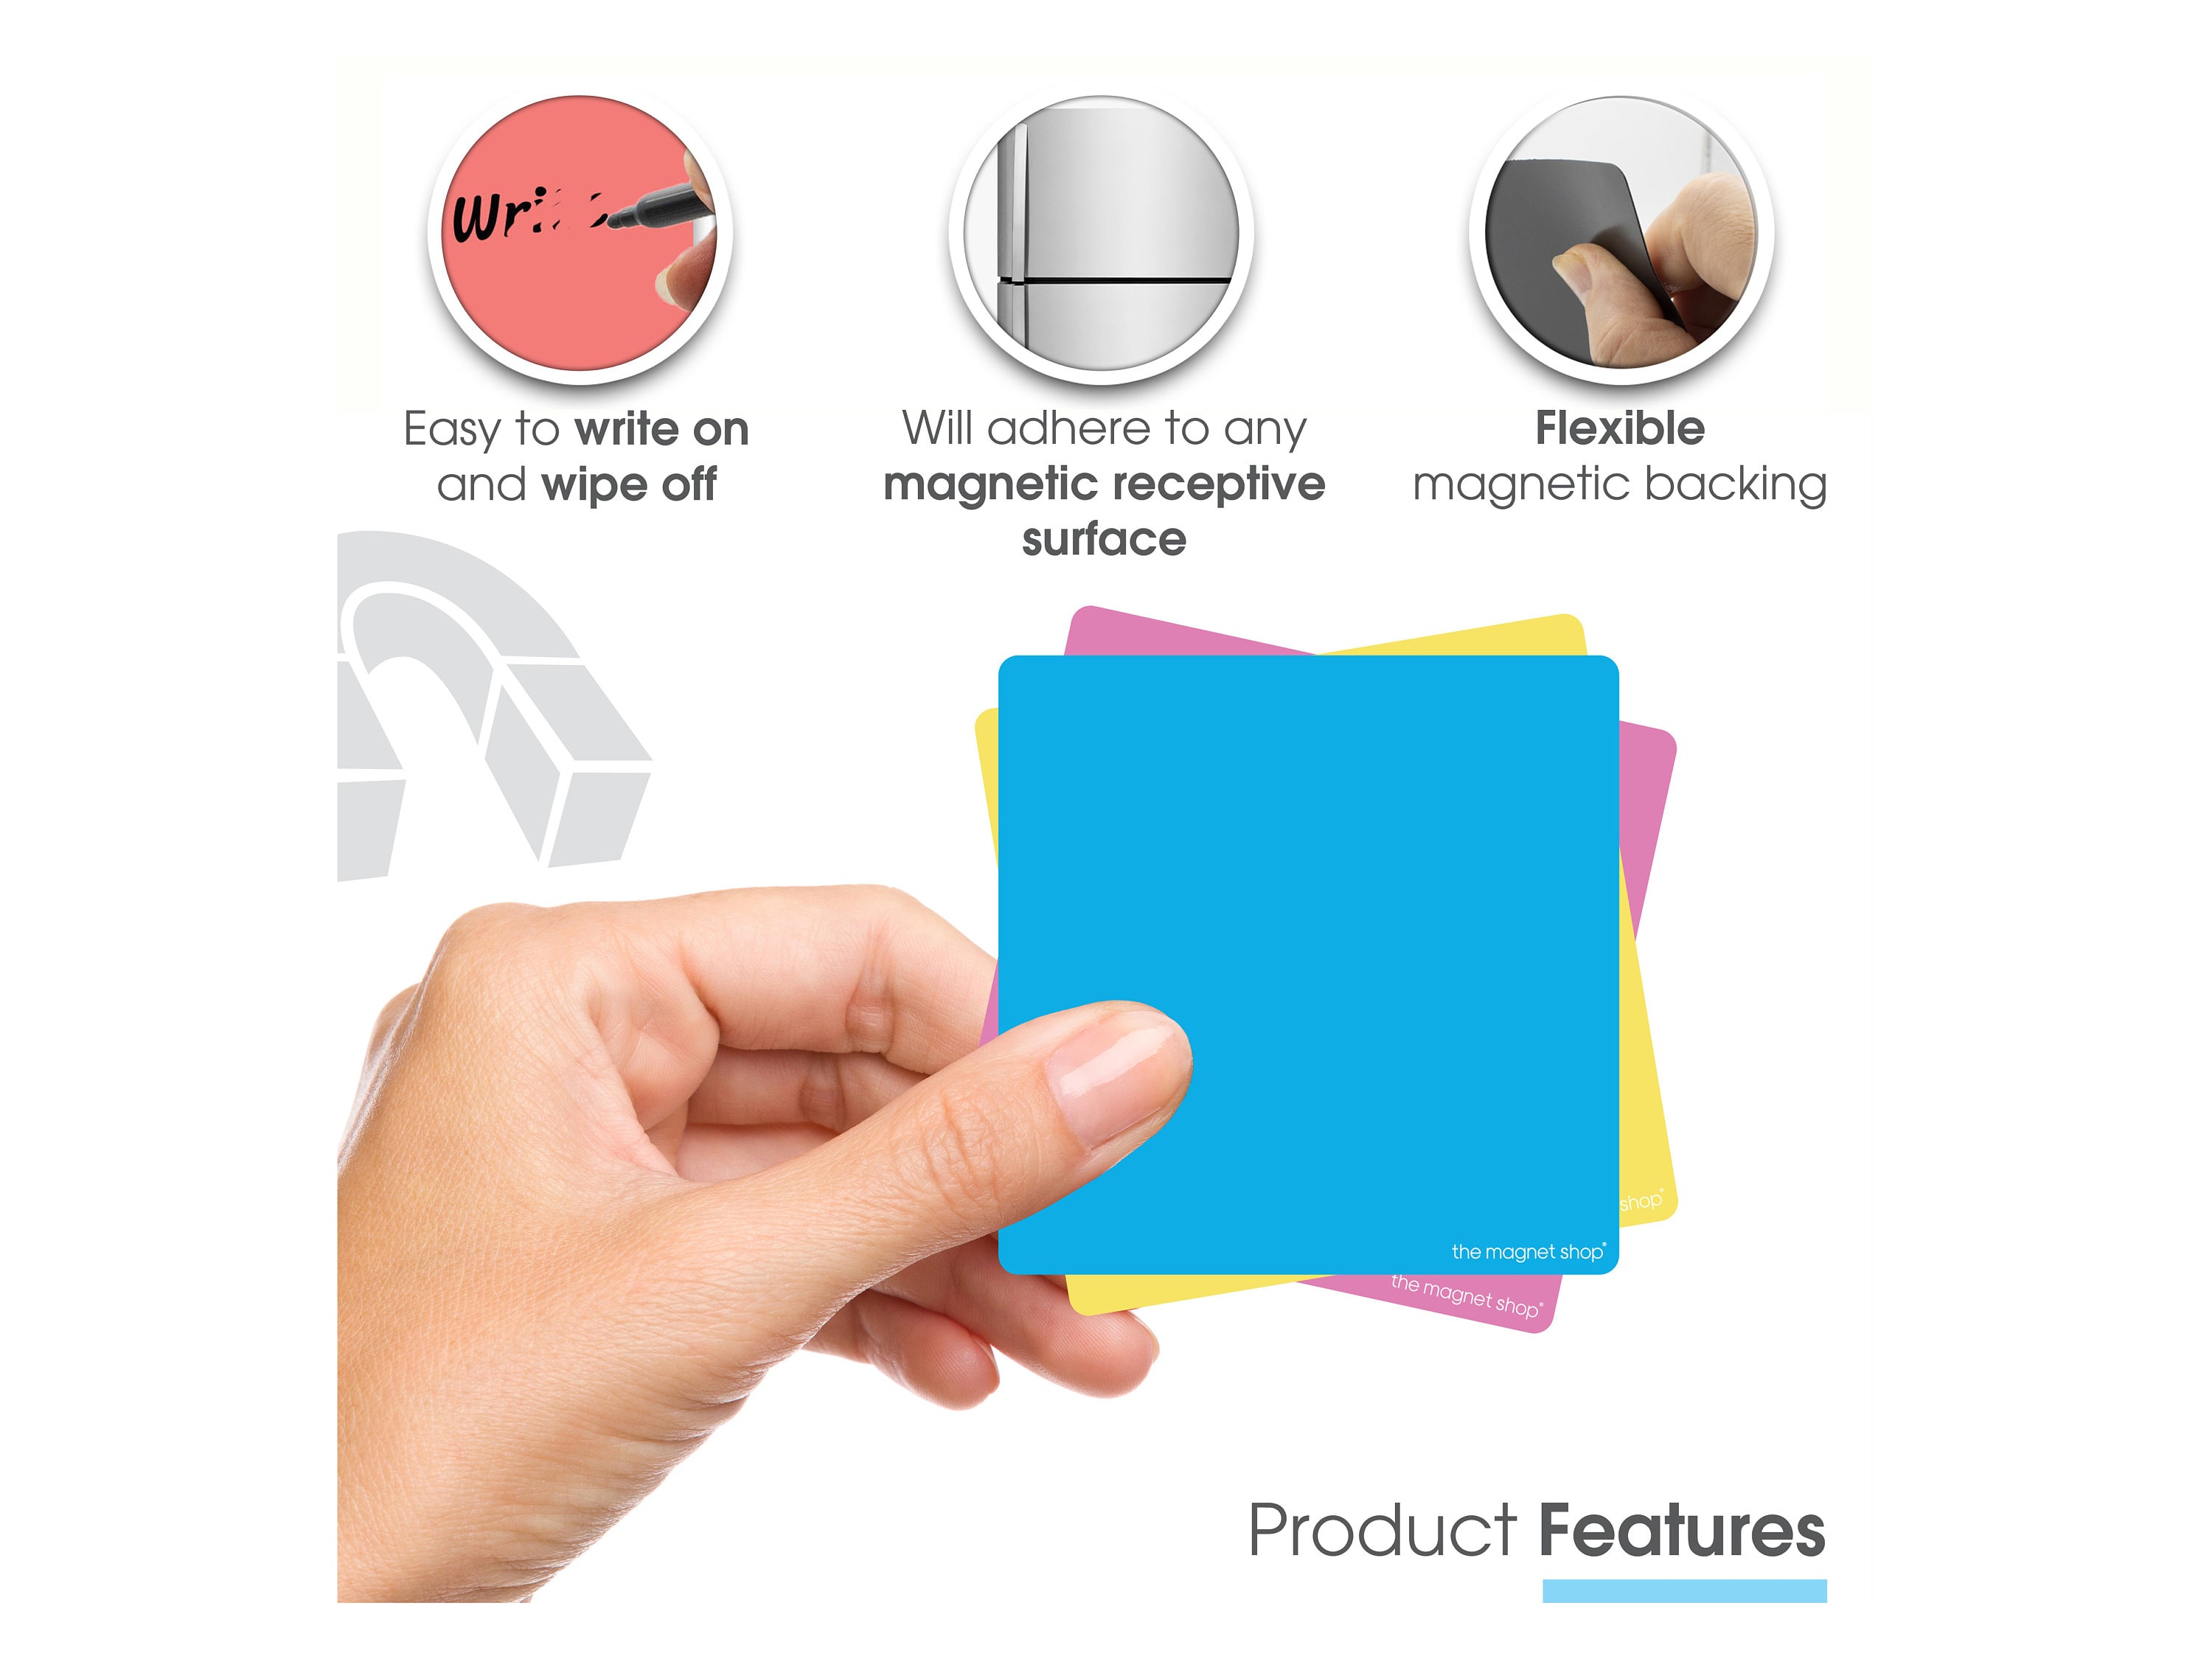 2 Sticky Note Pads, 100 Quality Assorted Pastel Coloured Square